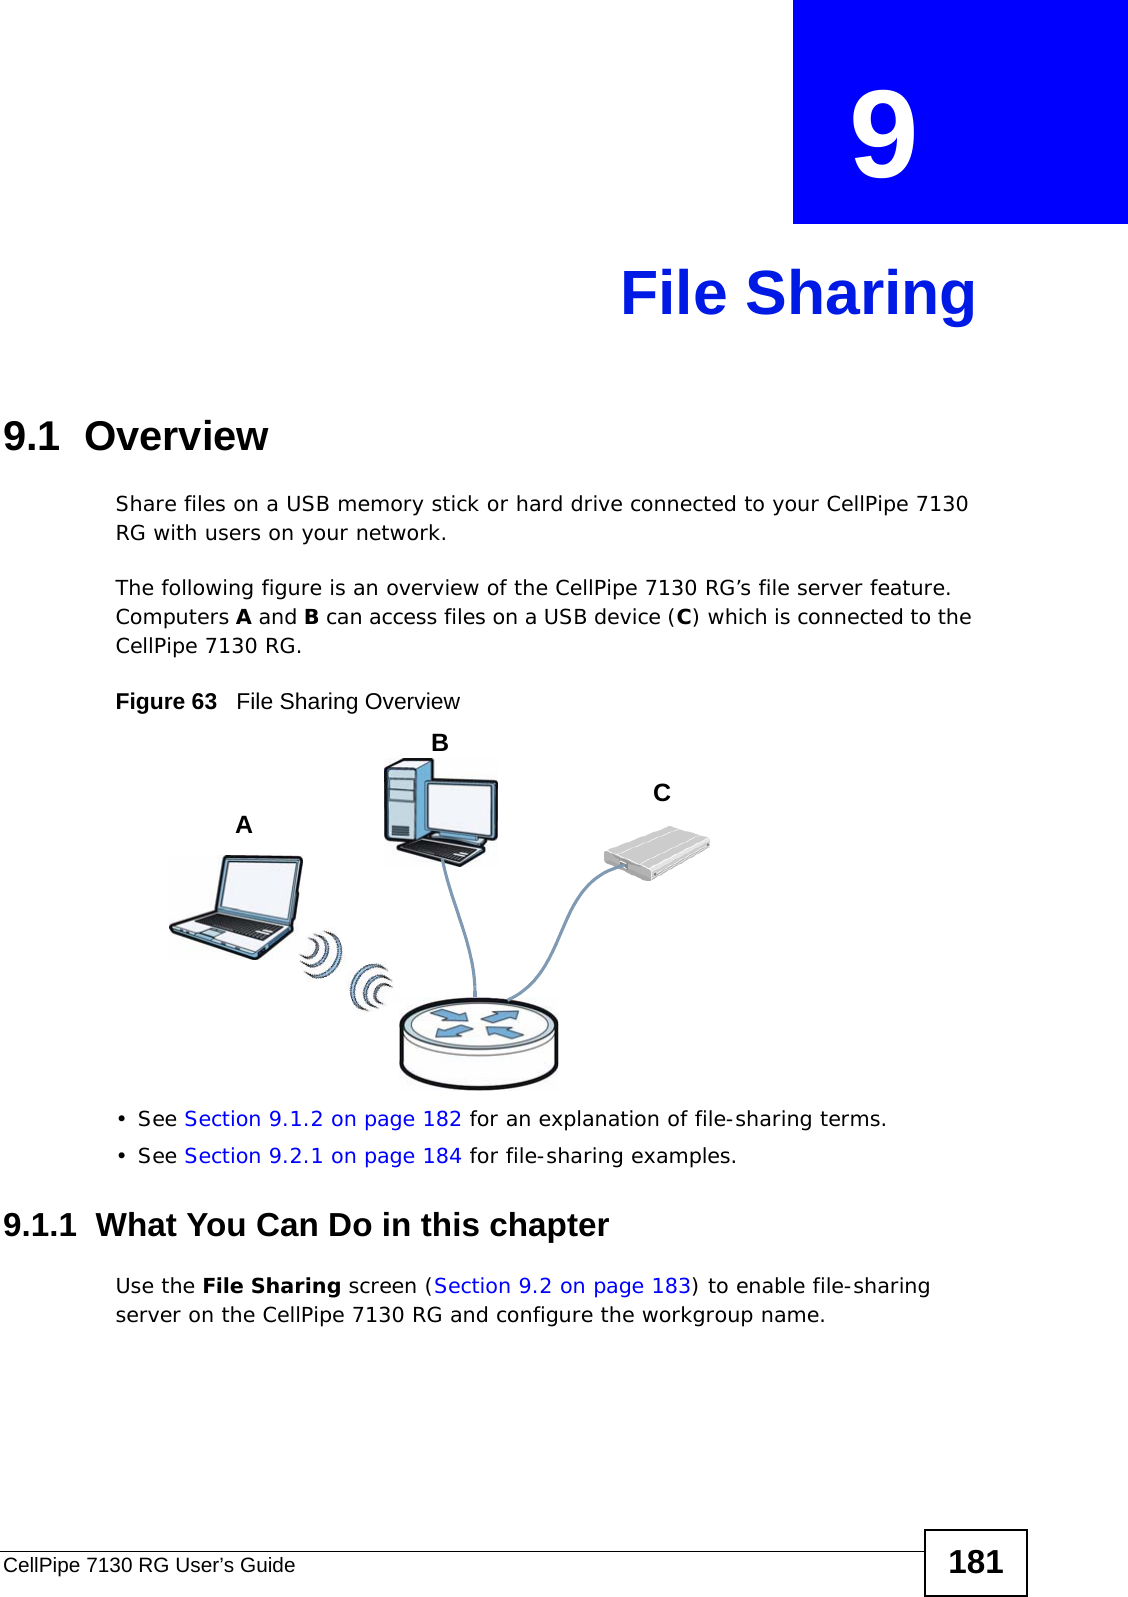 CellPipe 7130 RG User’s Guide 181CHAPTER  9 File Sharing9.1  OverviewShare files on a USB memory stick or hard drive connected to your CellPipe 7130 RG with users on your network. The following figure is an overview of the CellPipe 7130 RG’s file server feature. Computers A and B can access files on a USB device (C) which is connected to the CellPipe 7130 RG.Figure 63   File Sharing Overview• See Section 9.1.2 on page 182 for an explanation of file-sharing terms.• See Section 9.2.1 on page 184 for file-sharing examples.9.1.1  What You Can Do in this chapterUse the File Sharing screen (Section 9.2 on page 183) to enable file-sharing server on the CellPipe 7130 RG and configure the workgroup name.ABC